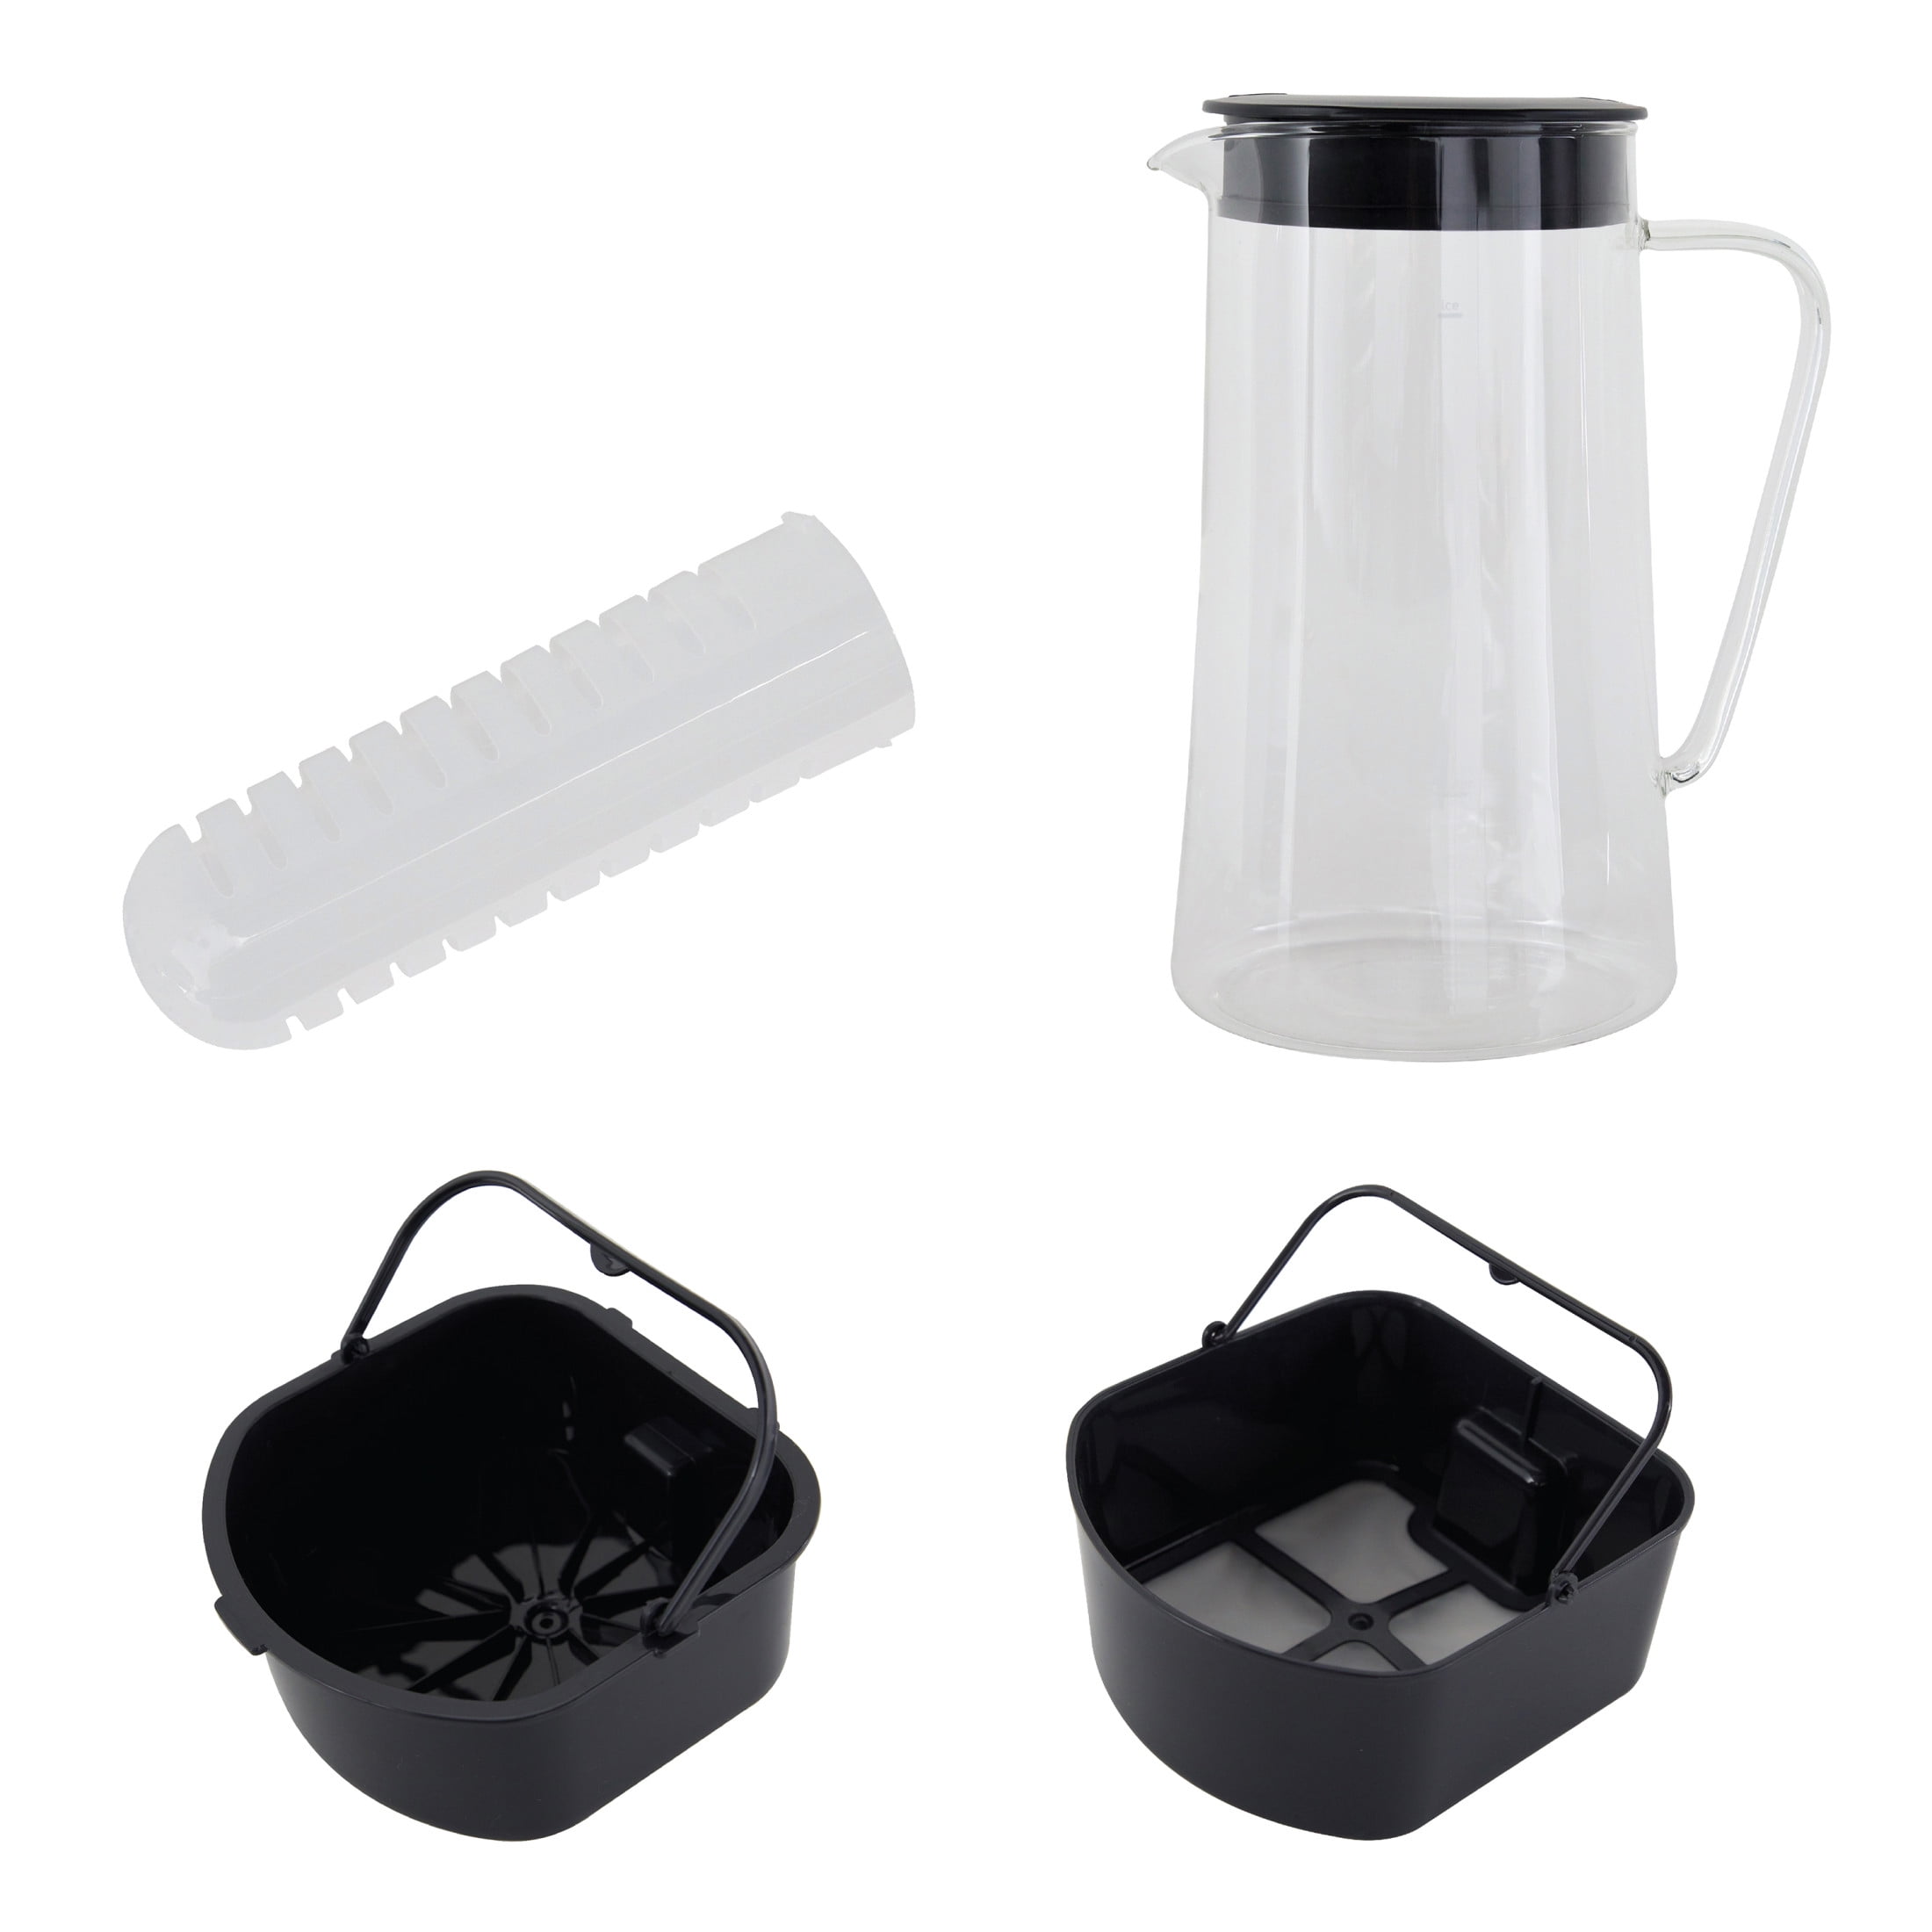 West Bend Iced Tea Maker Replacement Pitcher With Lid Instructions